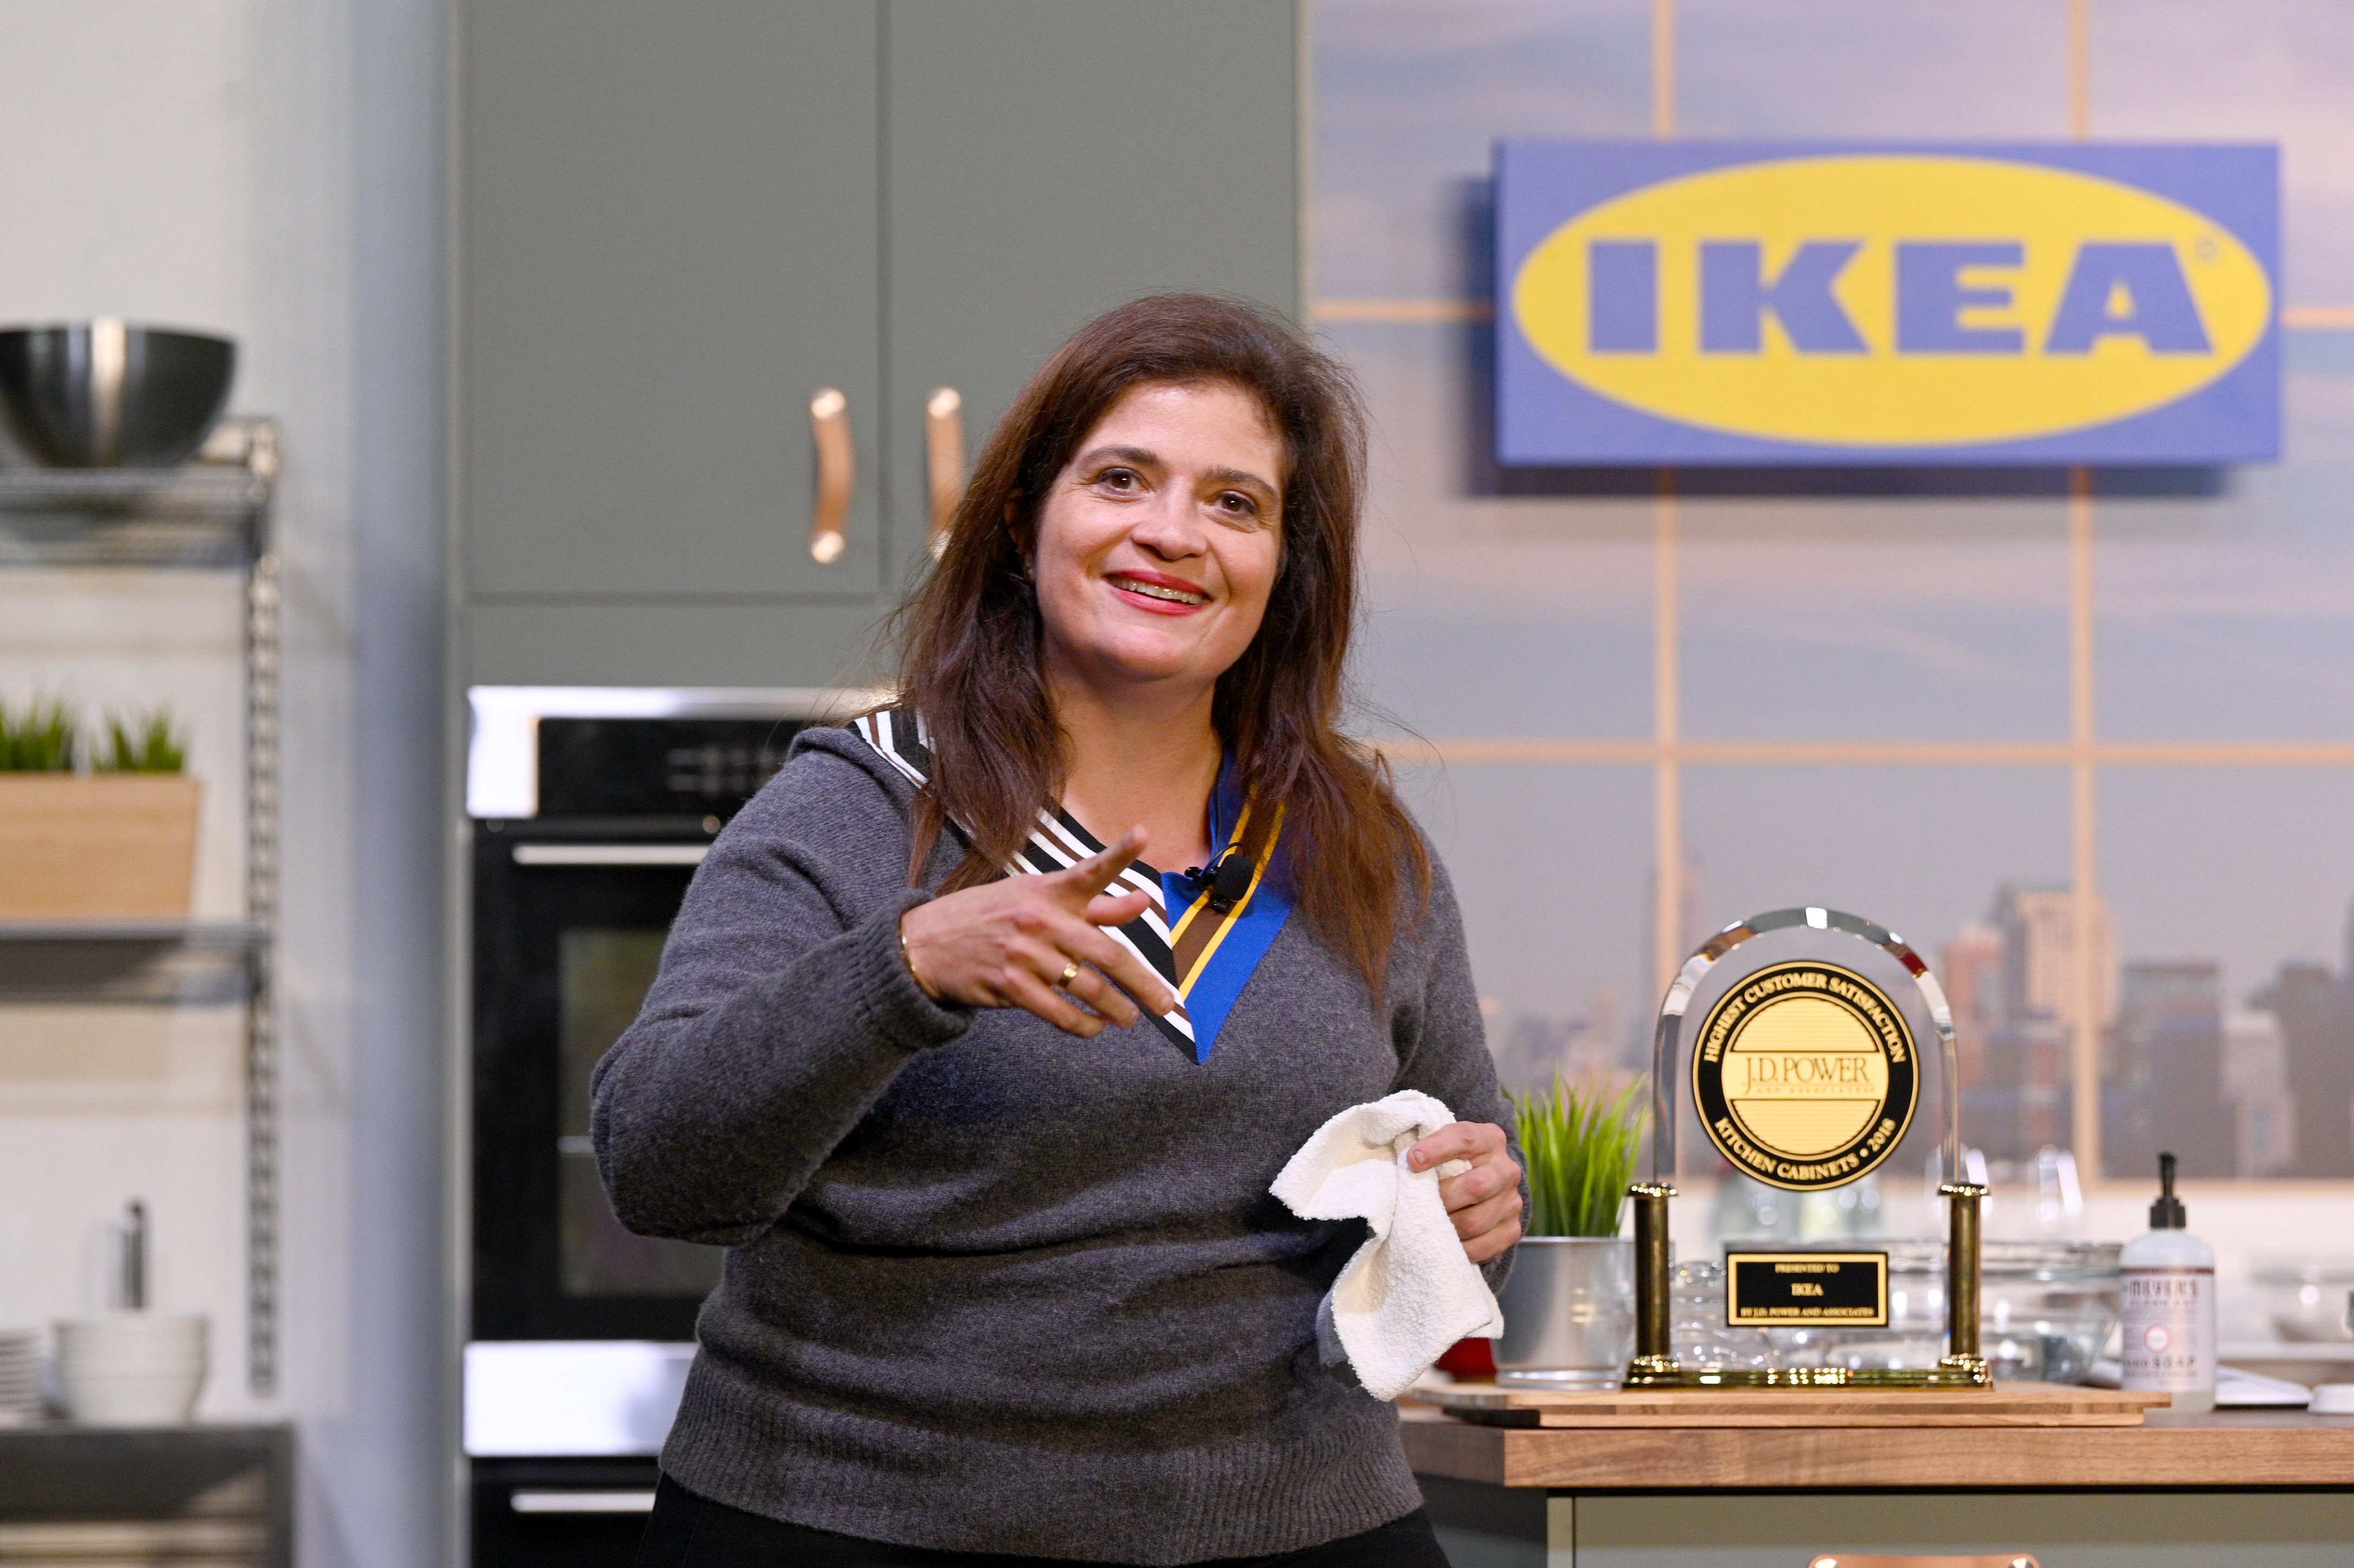 Chef Alex Guarnaschelli demonstrates how to prepare a meal at a 2019 Food Network event.